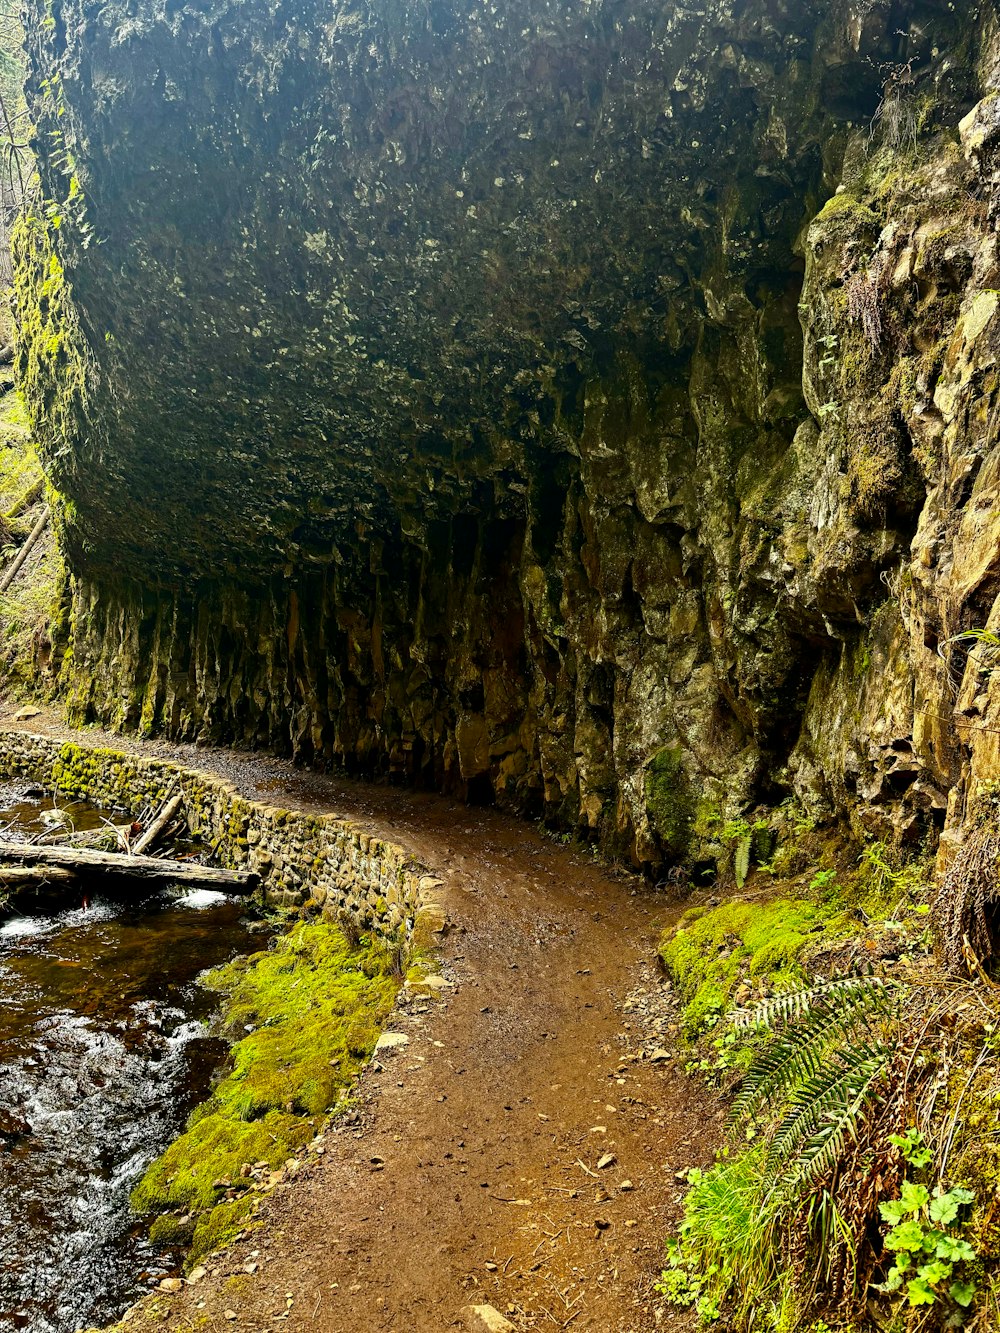 a path leading into a cave with moss growing on the rocks